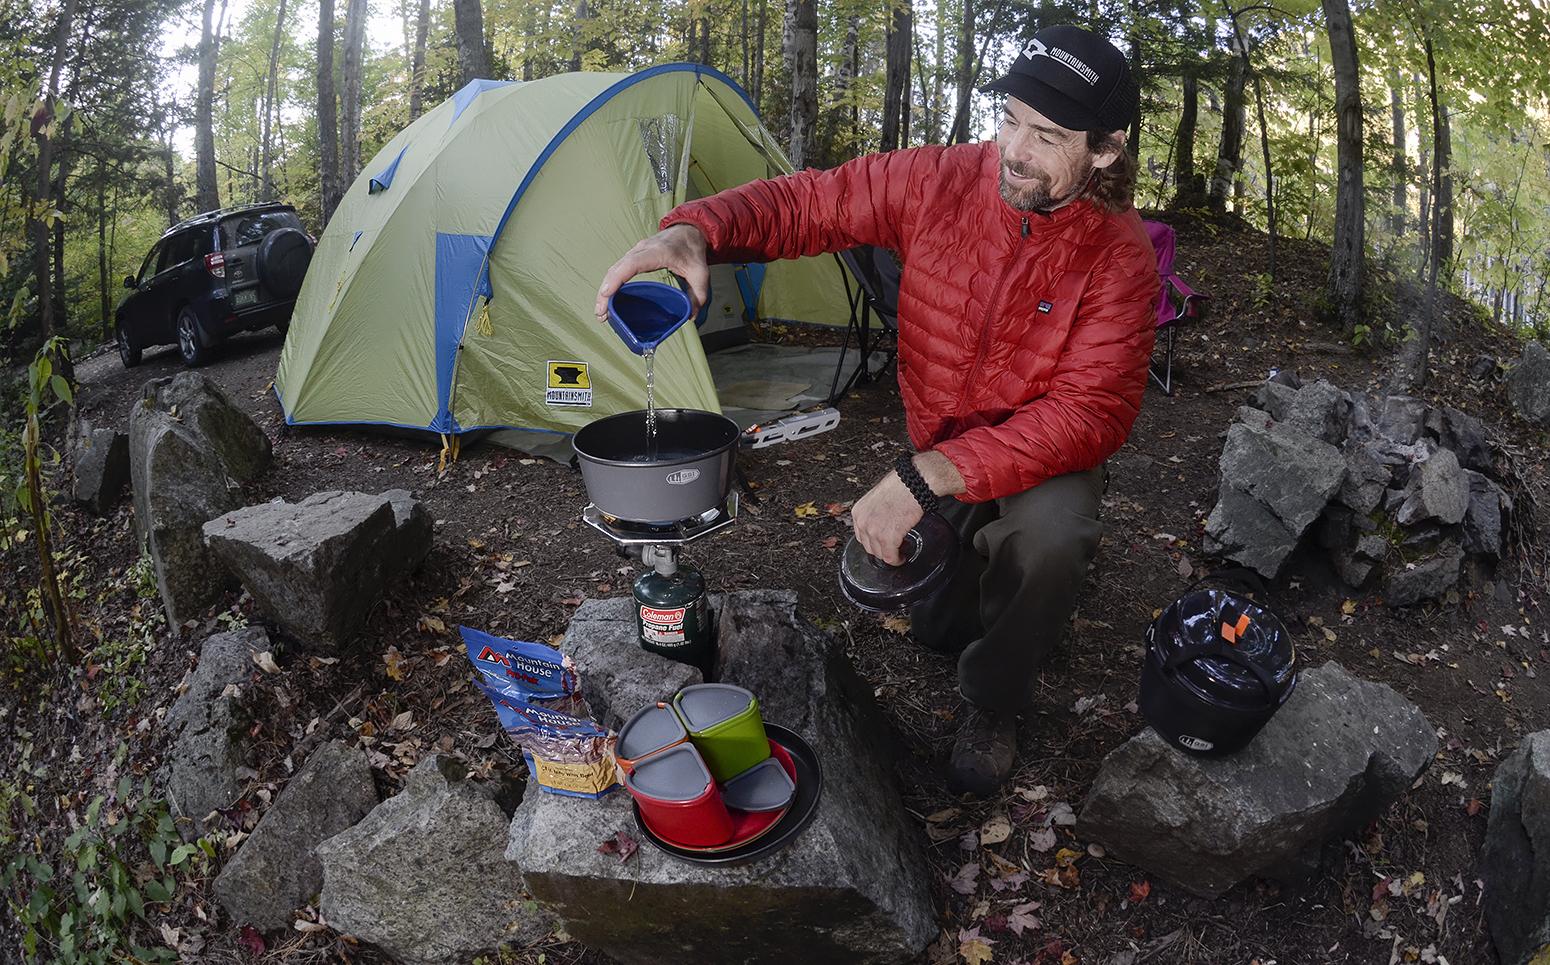 Curtis Savard prepares food at his campsite in front of the Mountainsmith Conifer tent